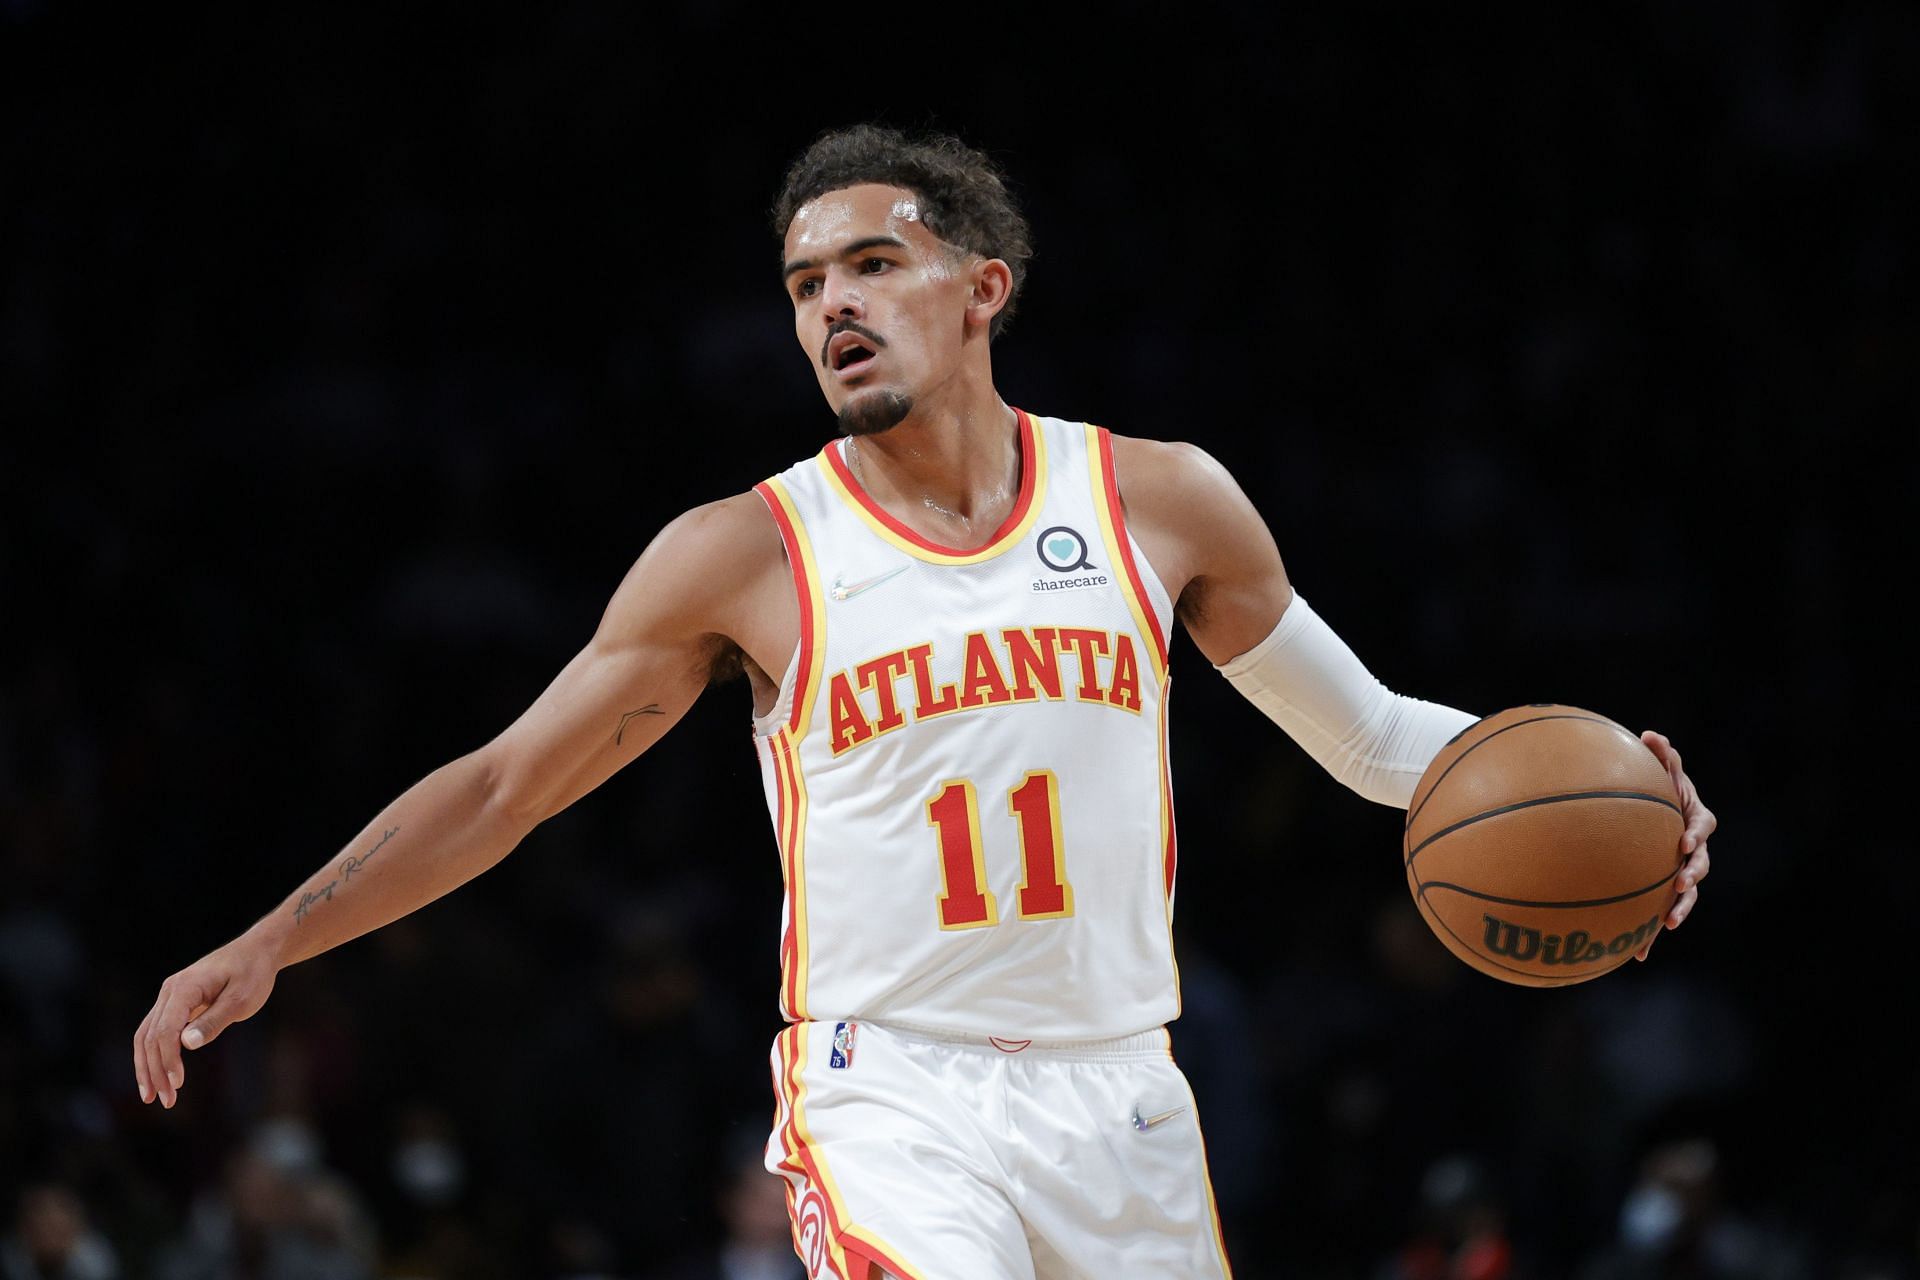 Trae Young #11 of the Atlanta Hawks dribbles during the first half against the Brooklyn Nets at Barclays Center on November 03, 2021 in the Brooklyn borough of New York City.